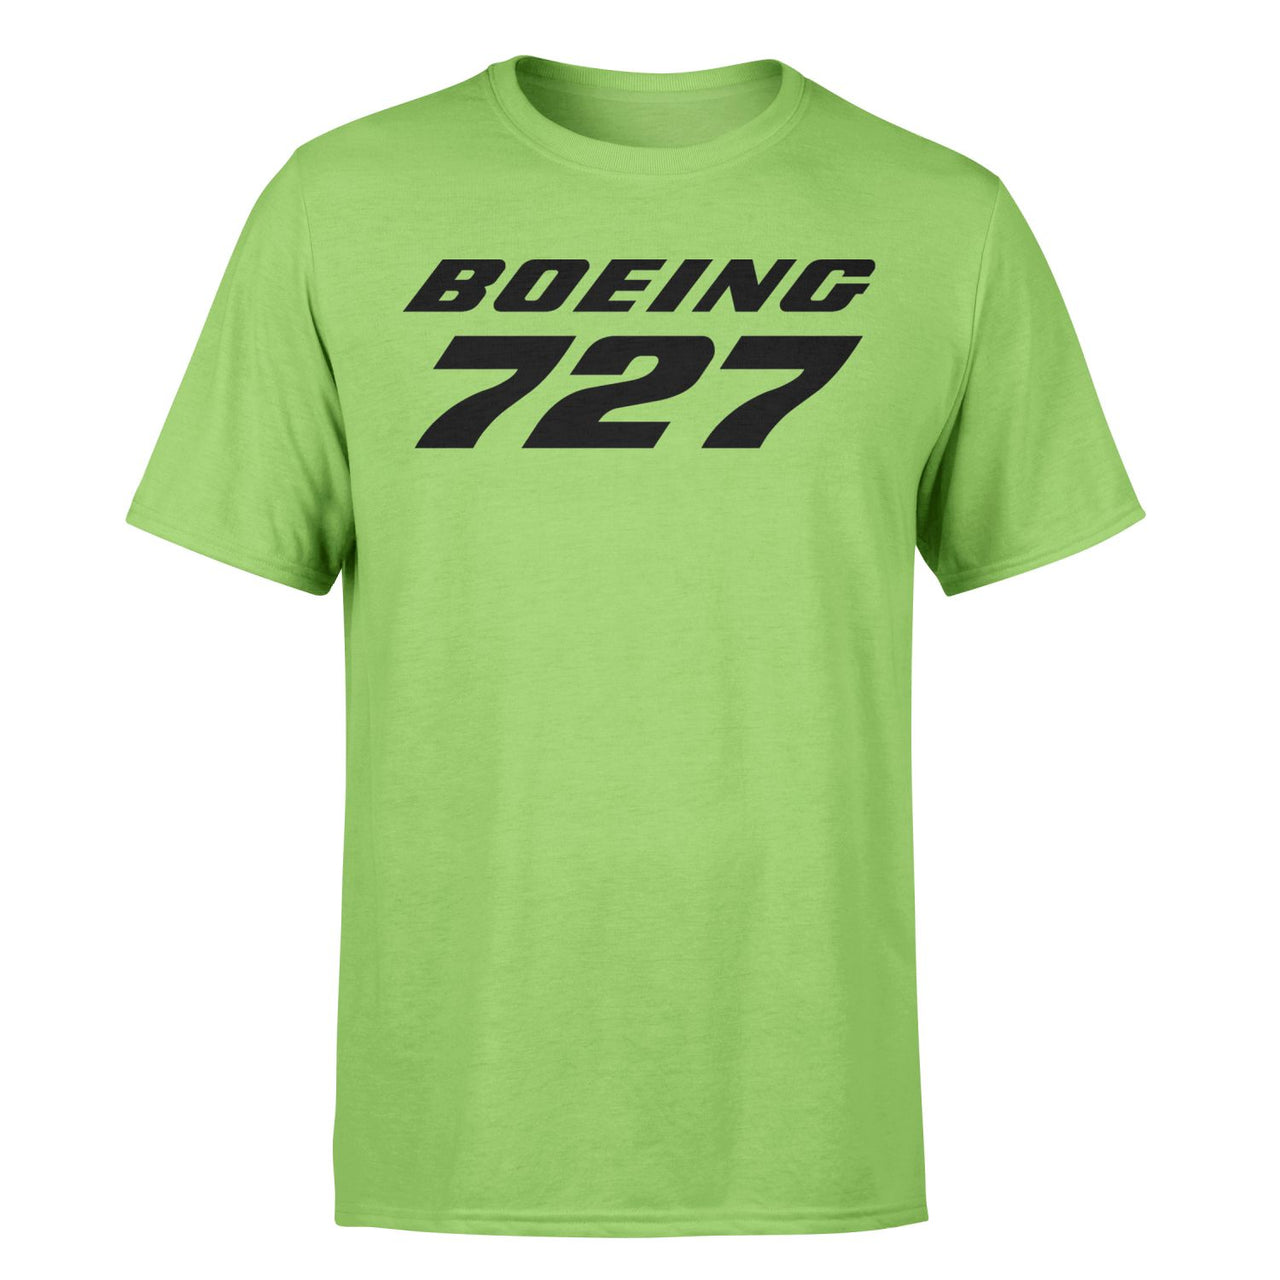 Boeing 727 & Text Designed T-Shirts